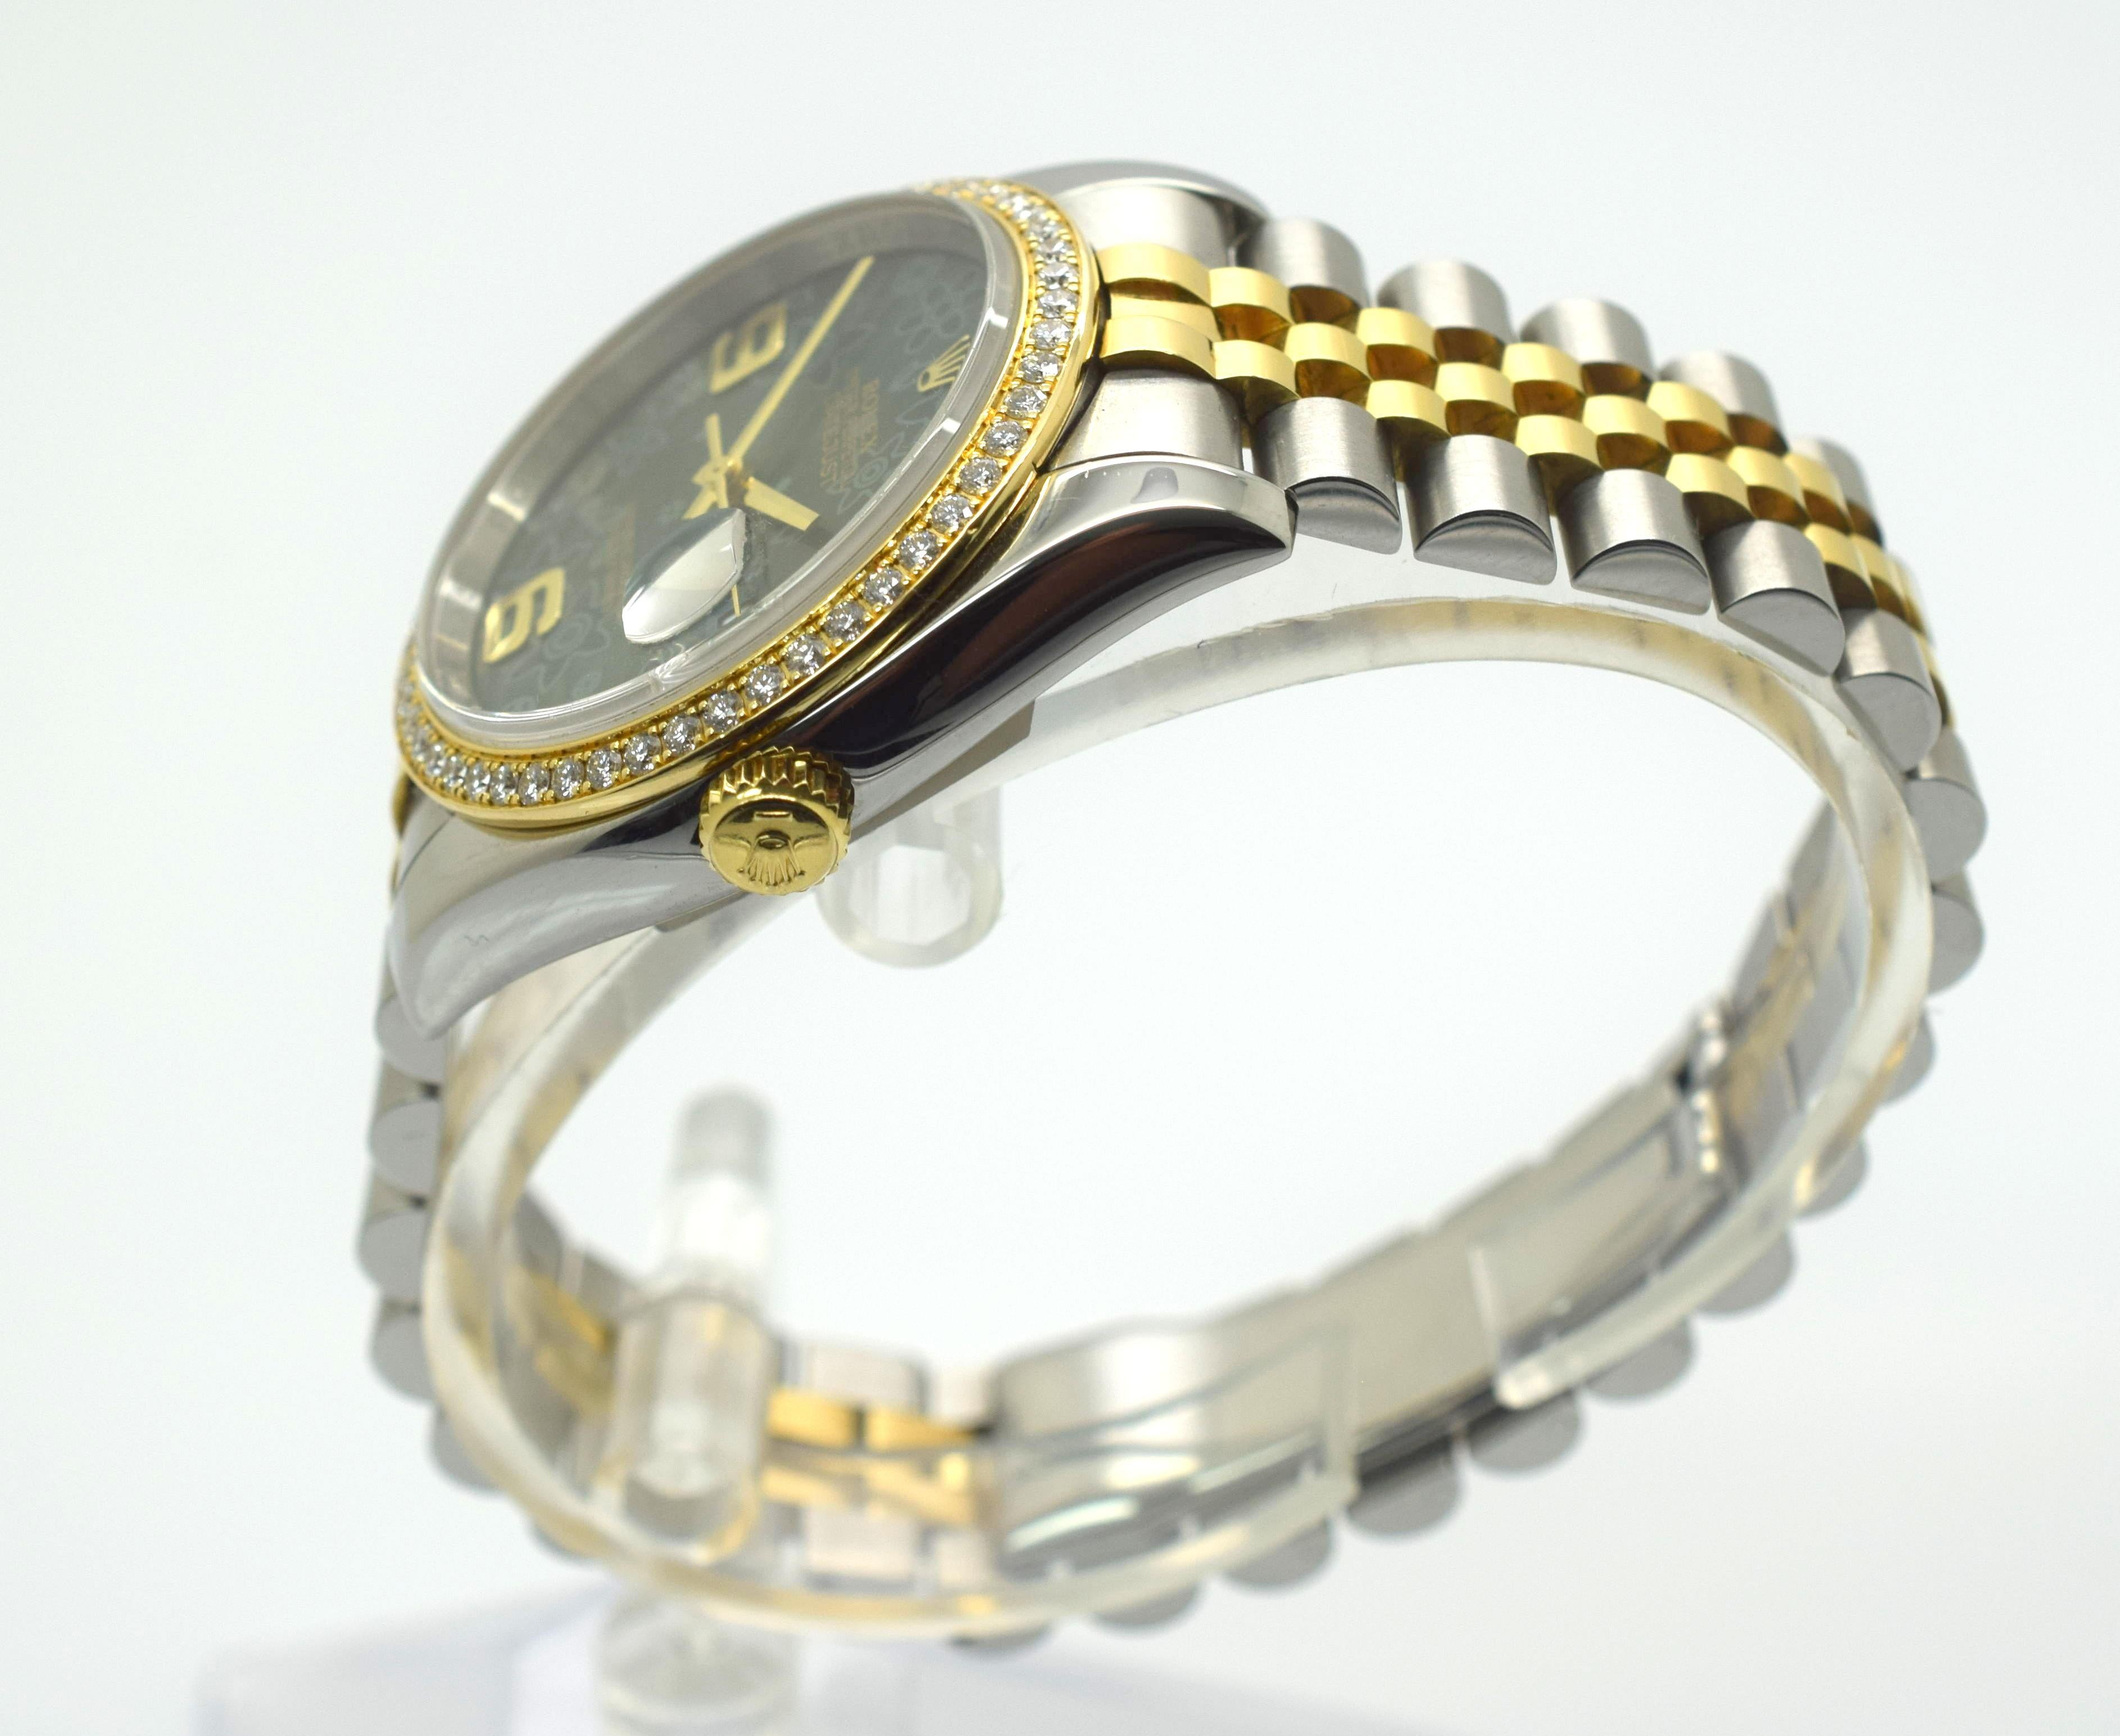 Stainless steel and 18kt yellow gold case with a stainless steel and 18kt yellow gold jubilee bracelet. Fixed 18kt yellow gold bezel set with 52 diamonds bezel. Green floral dial with gold-tone hands and Arabic hour markers. Dial Type: Analog. Date